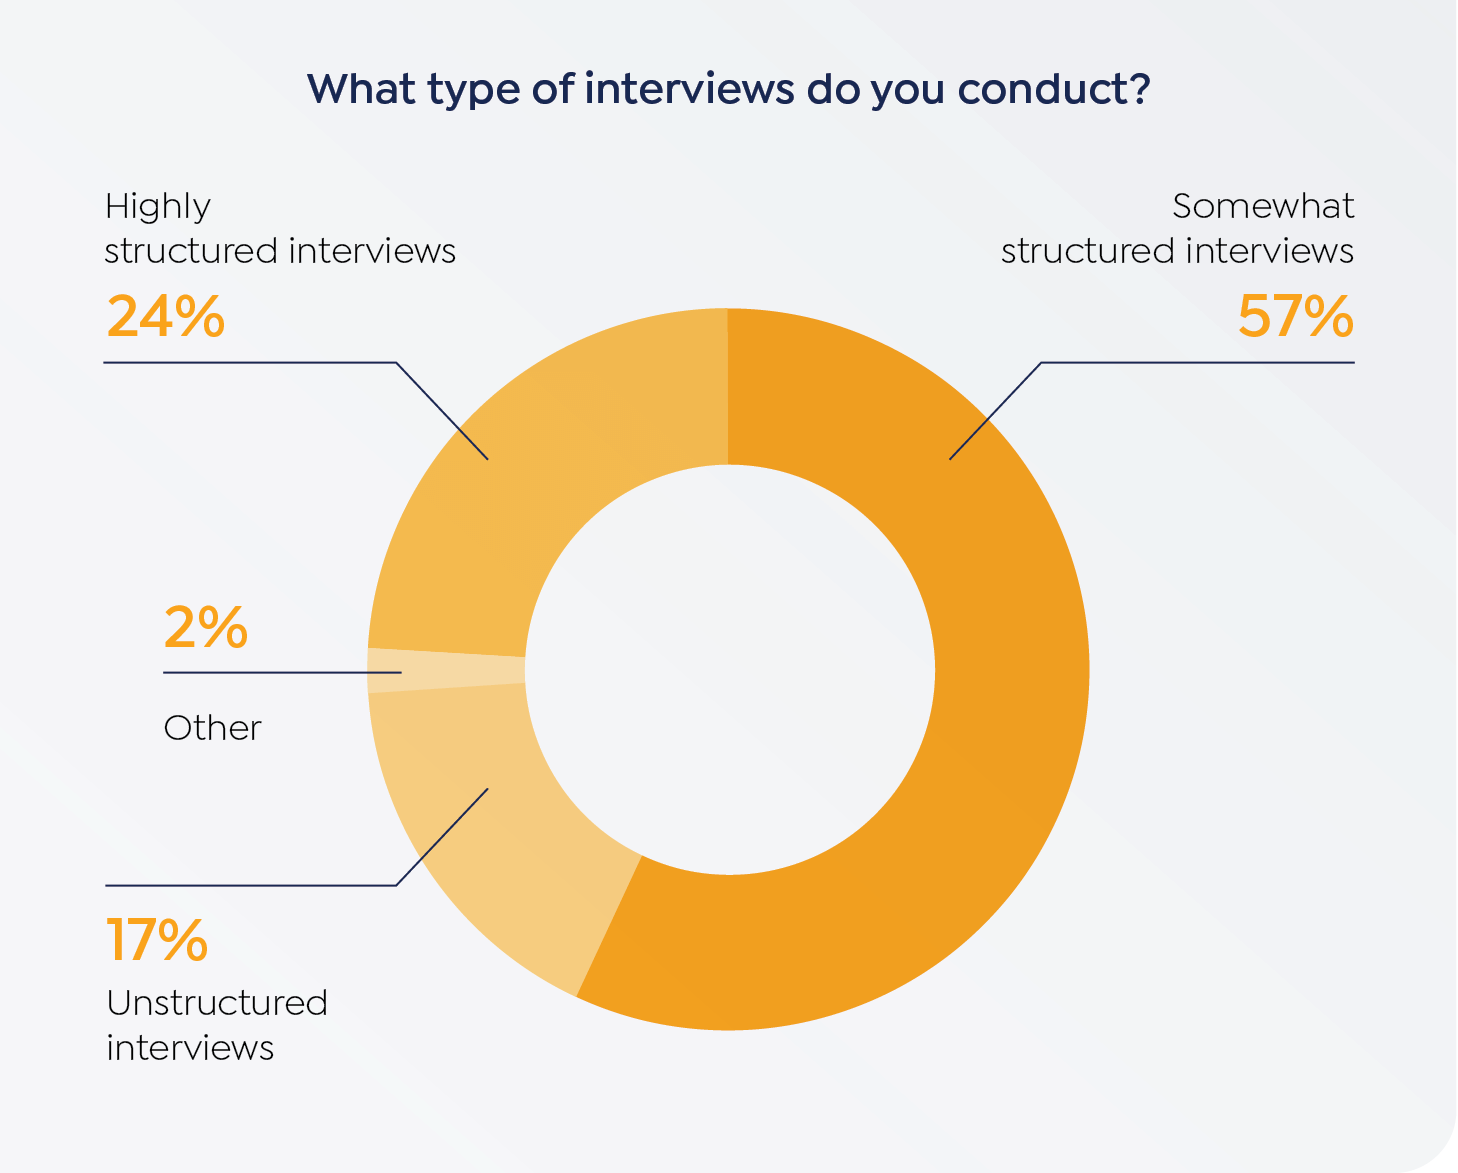 Pie chart with survey results showing what type of interviews do you conduct